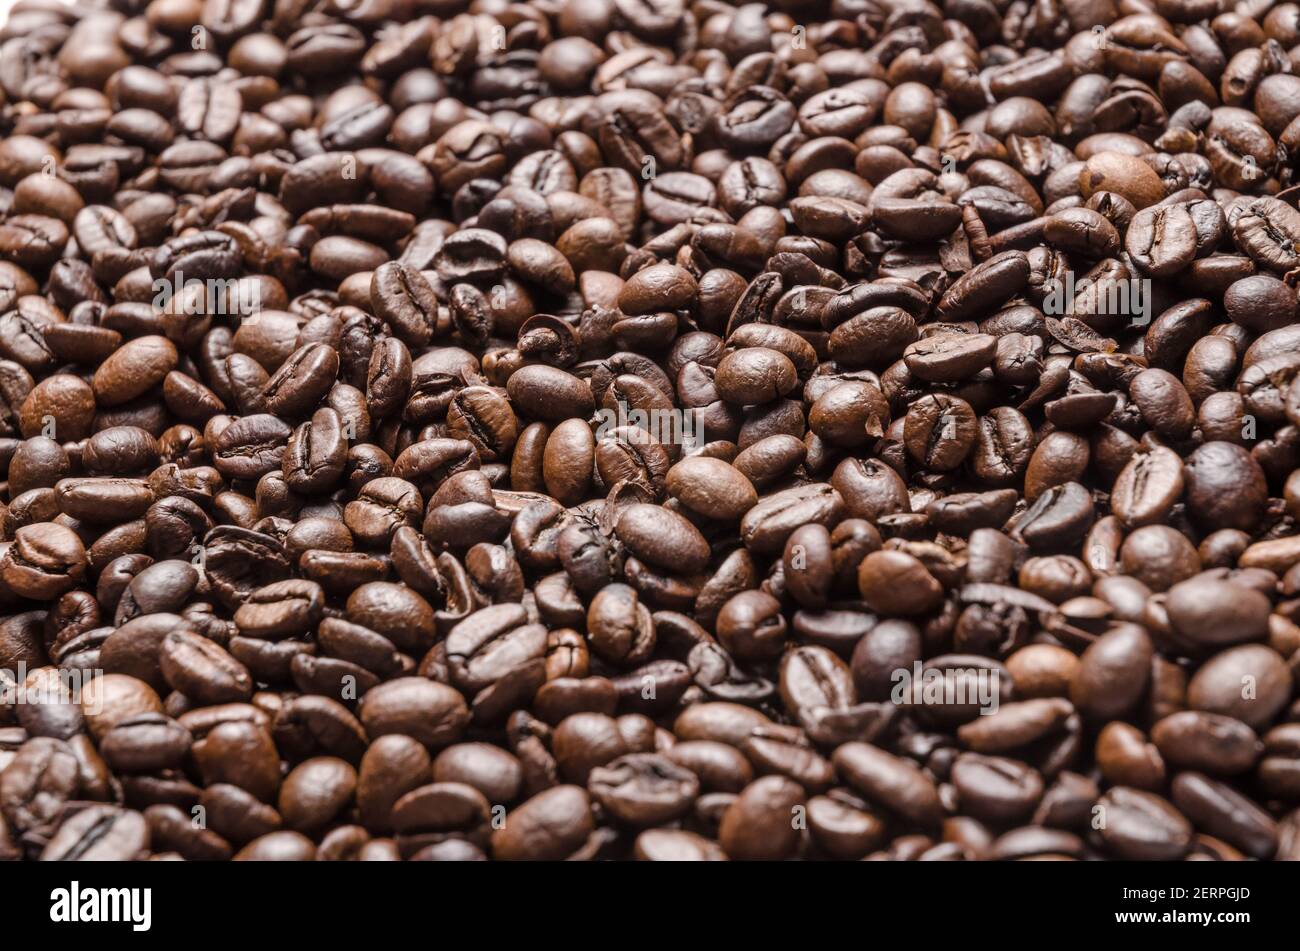 Roasted dark espresso coffee beans, full frame wallpaper background, close-up, flat lay view from above, still life, I love coffee concept Stock Photo